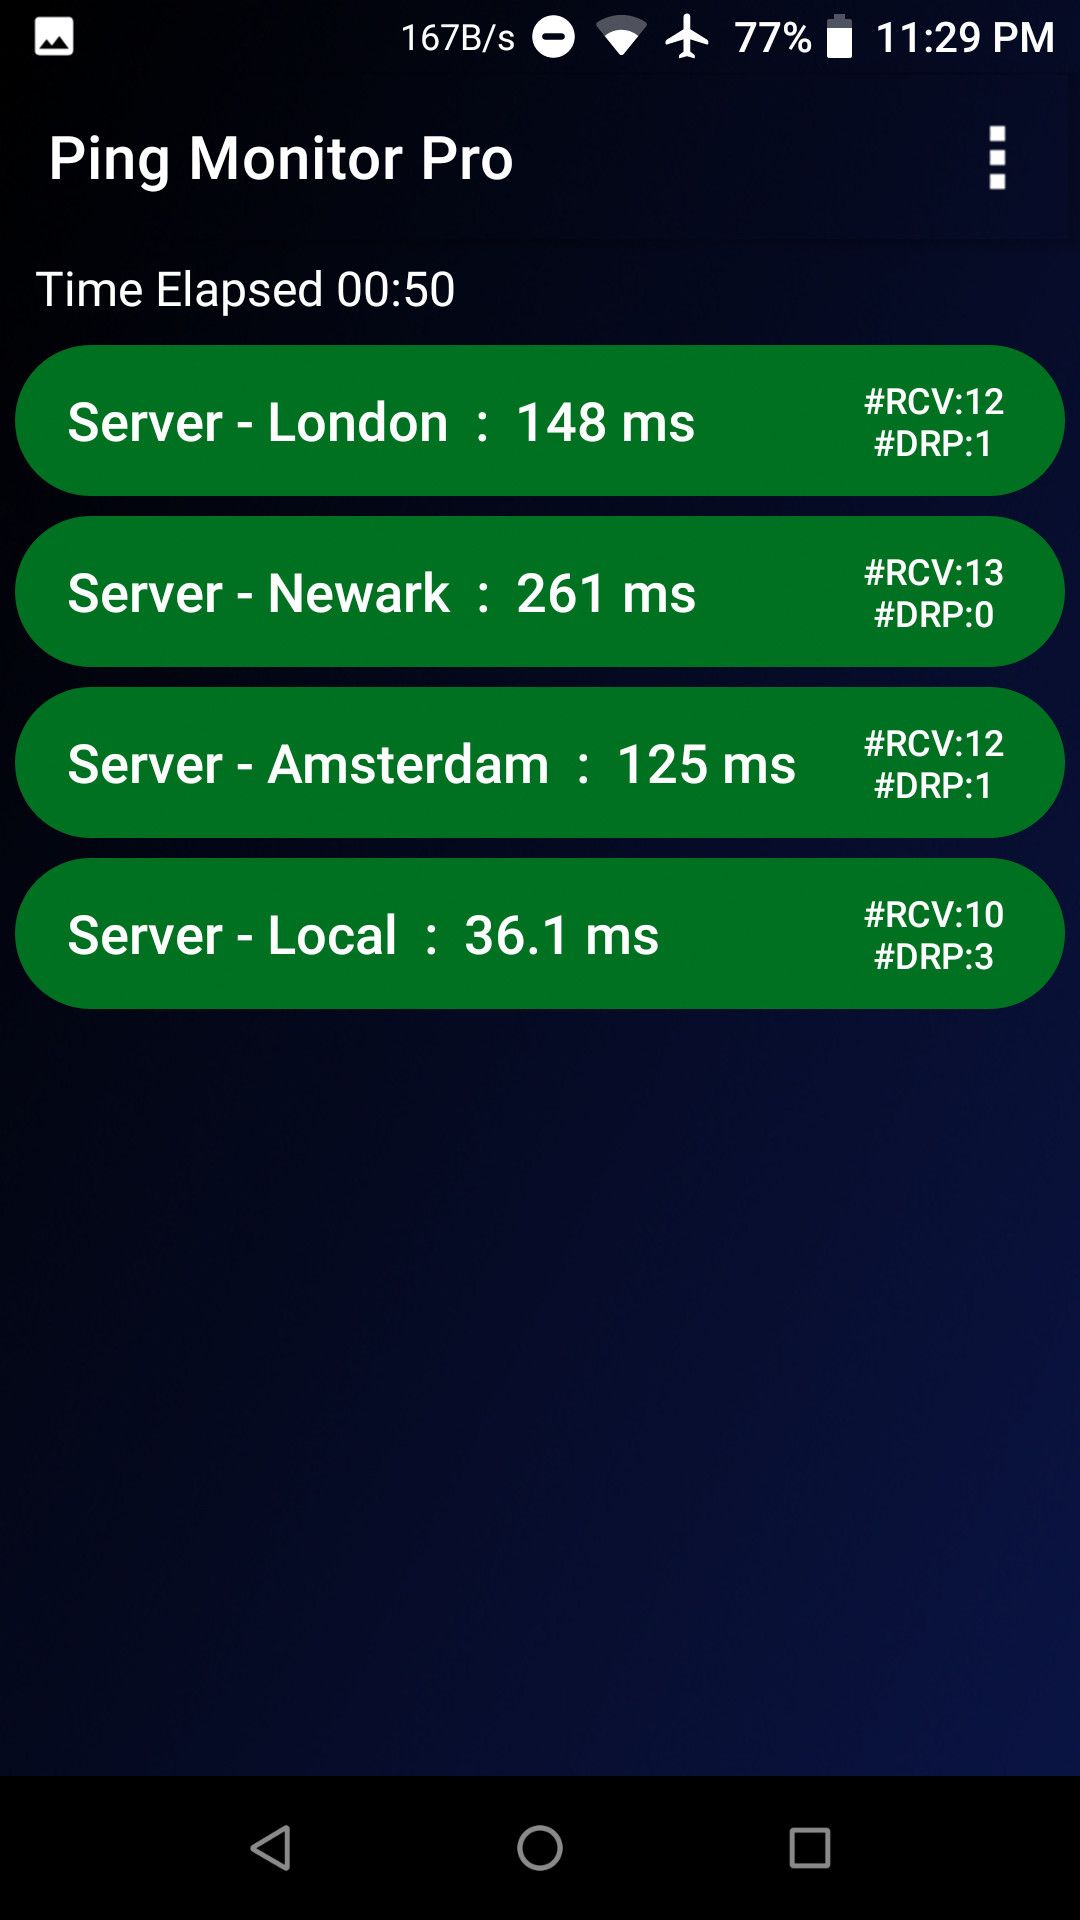 Ping monitor pro showing ping time of servers at various locations